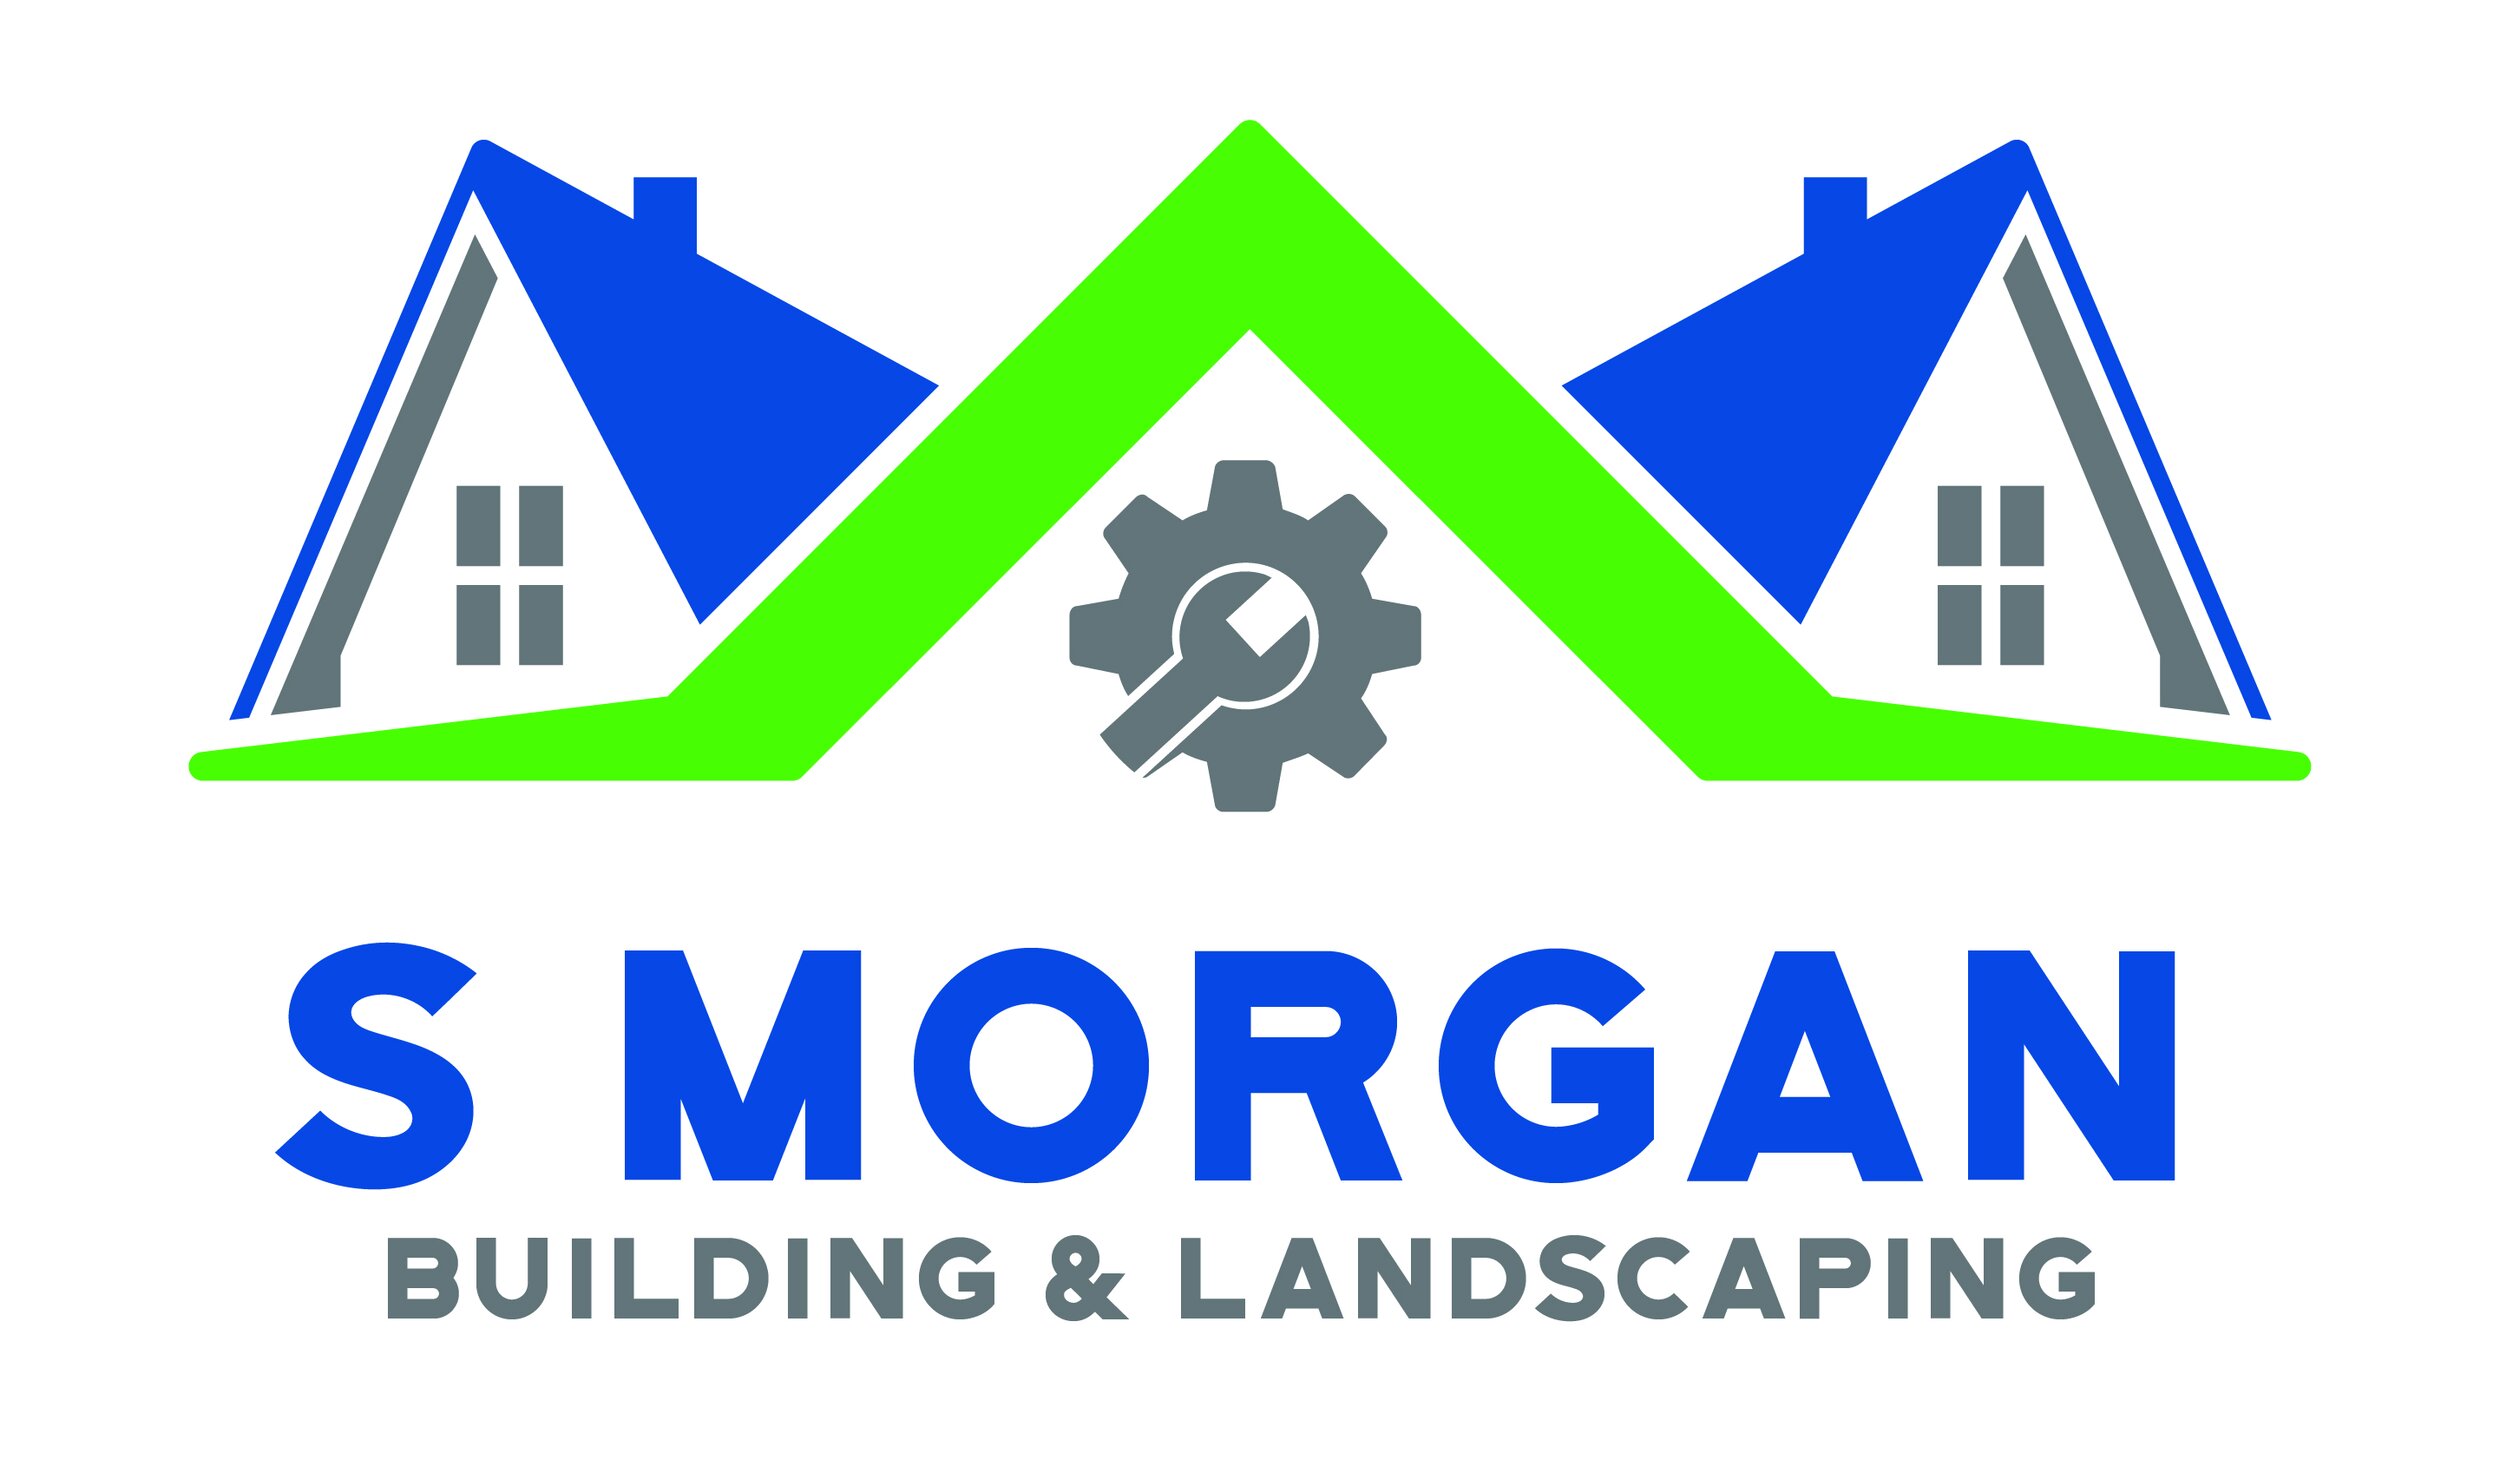 S Morgan Building and Landscaping